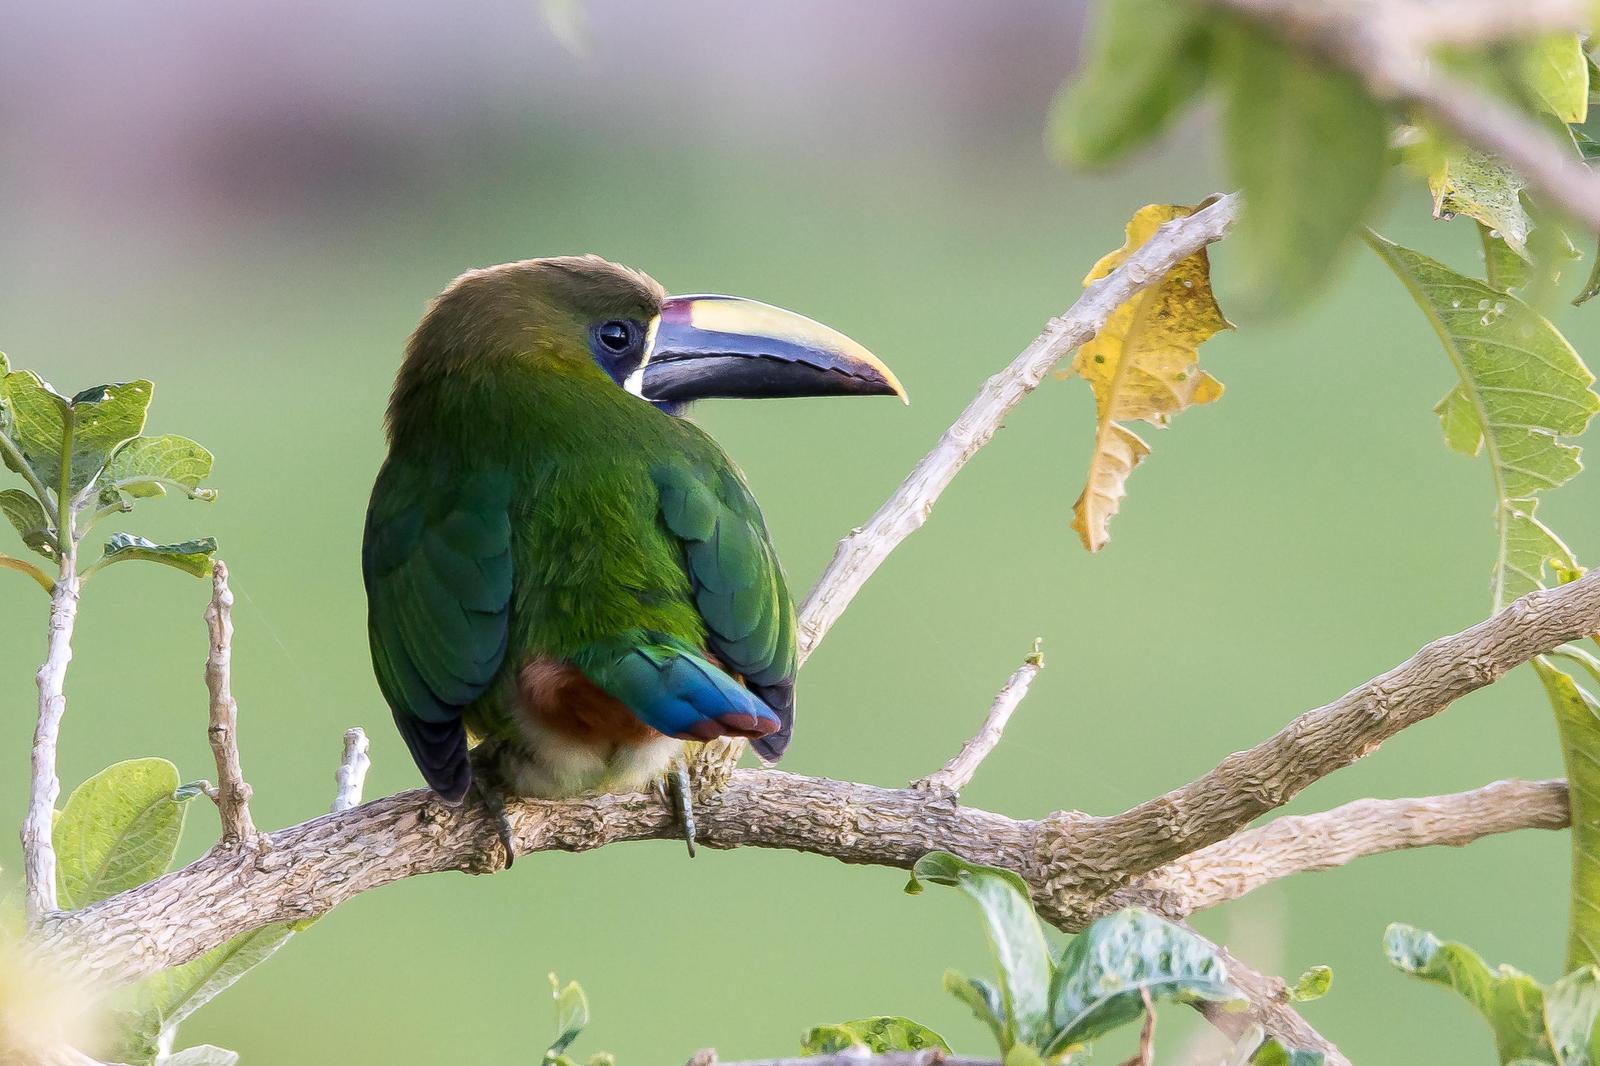 Northern Emerald-Toucanet (Wagler's) Photo by Gerald Hoekstra